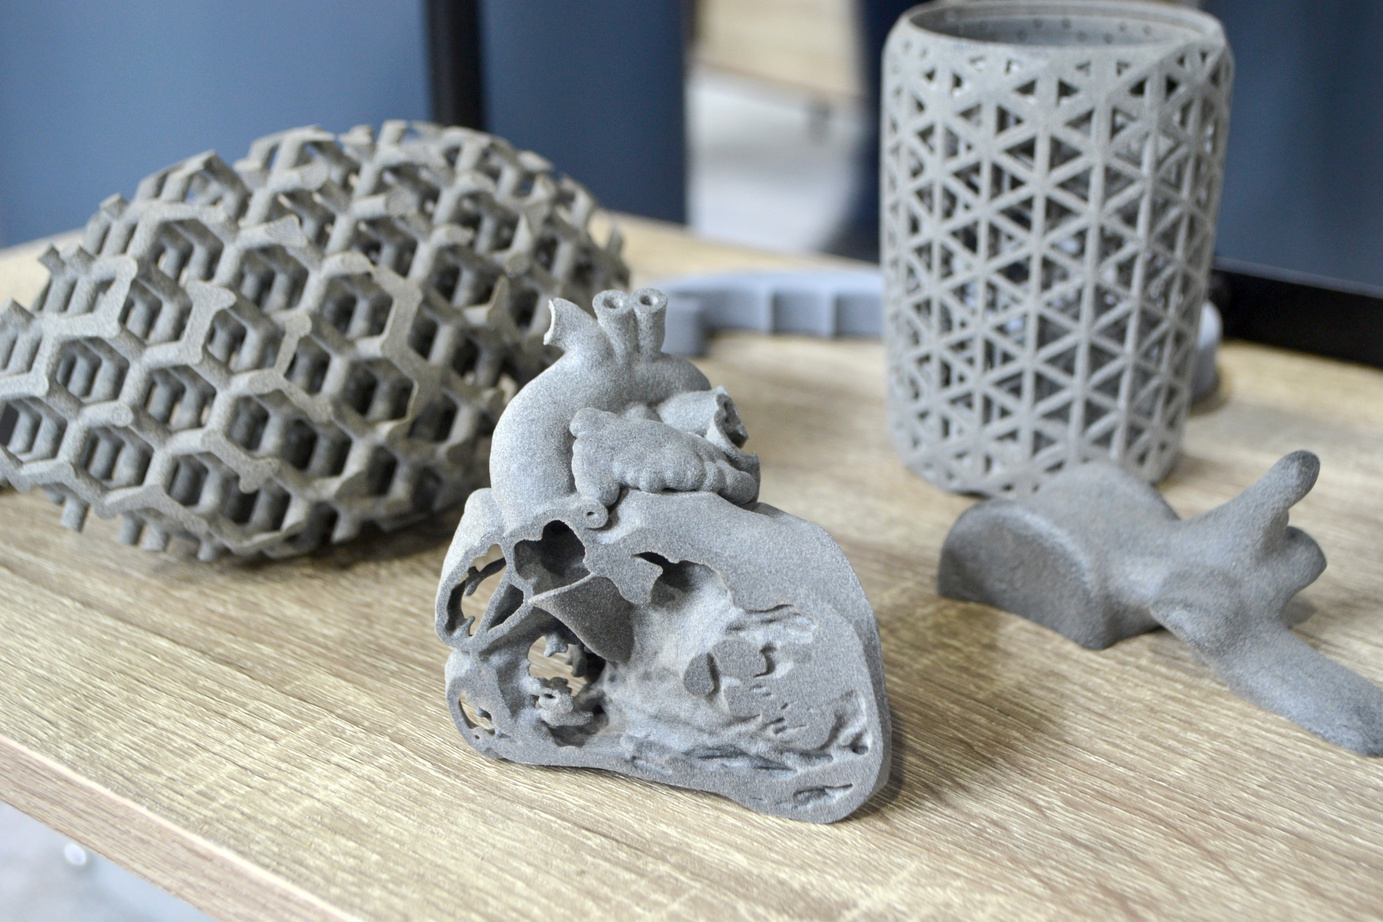 Prototype Prototype of Human Heart and Art Objects Printed on 3D Printer.